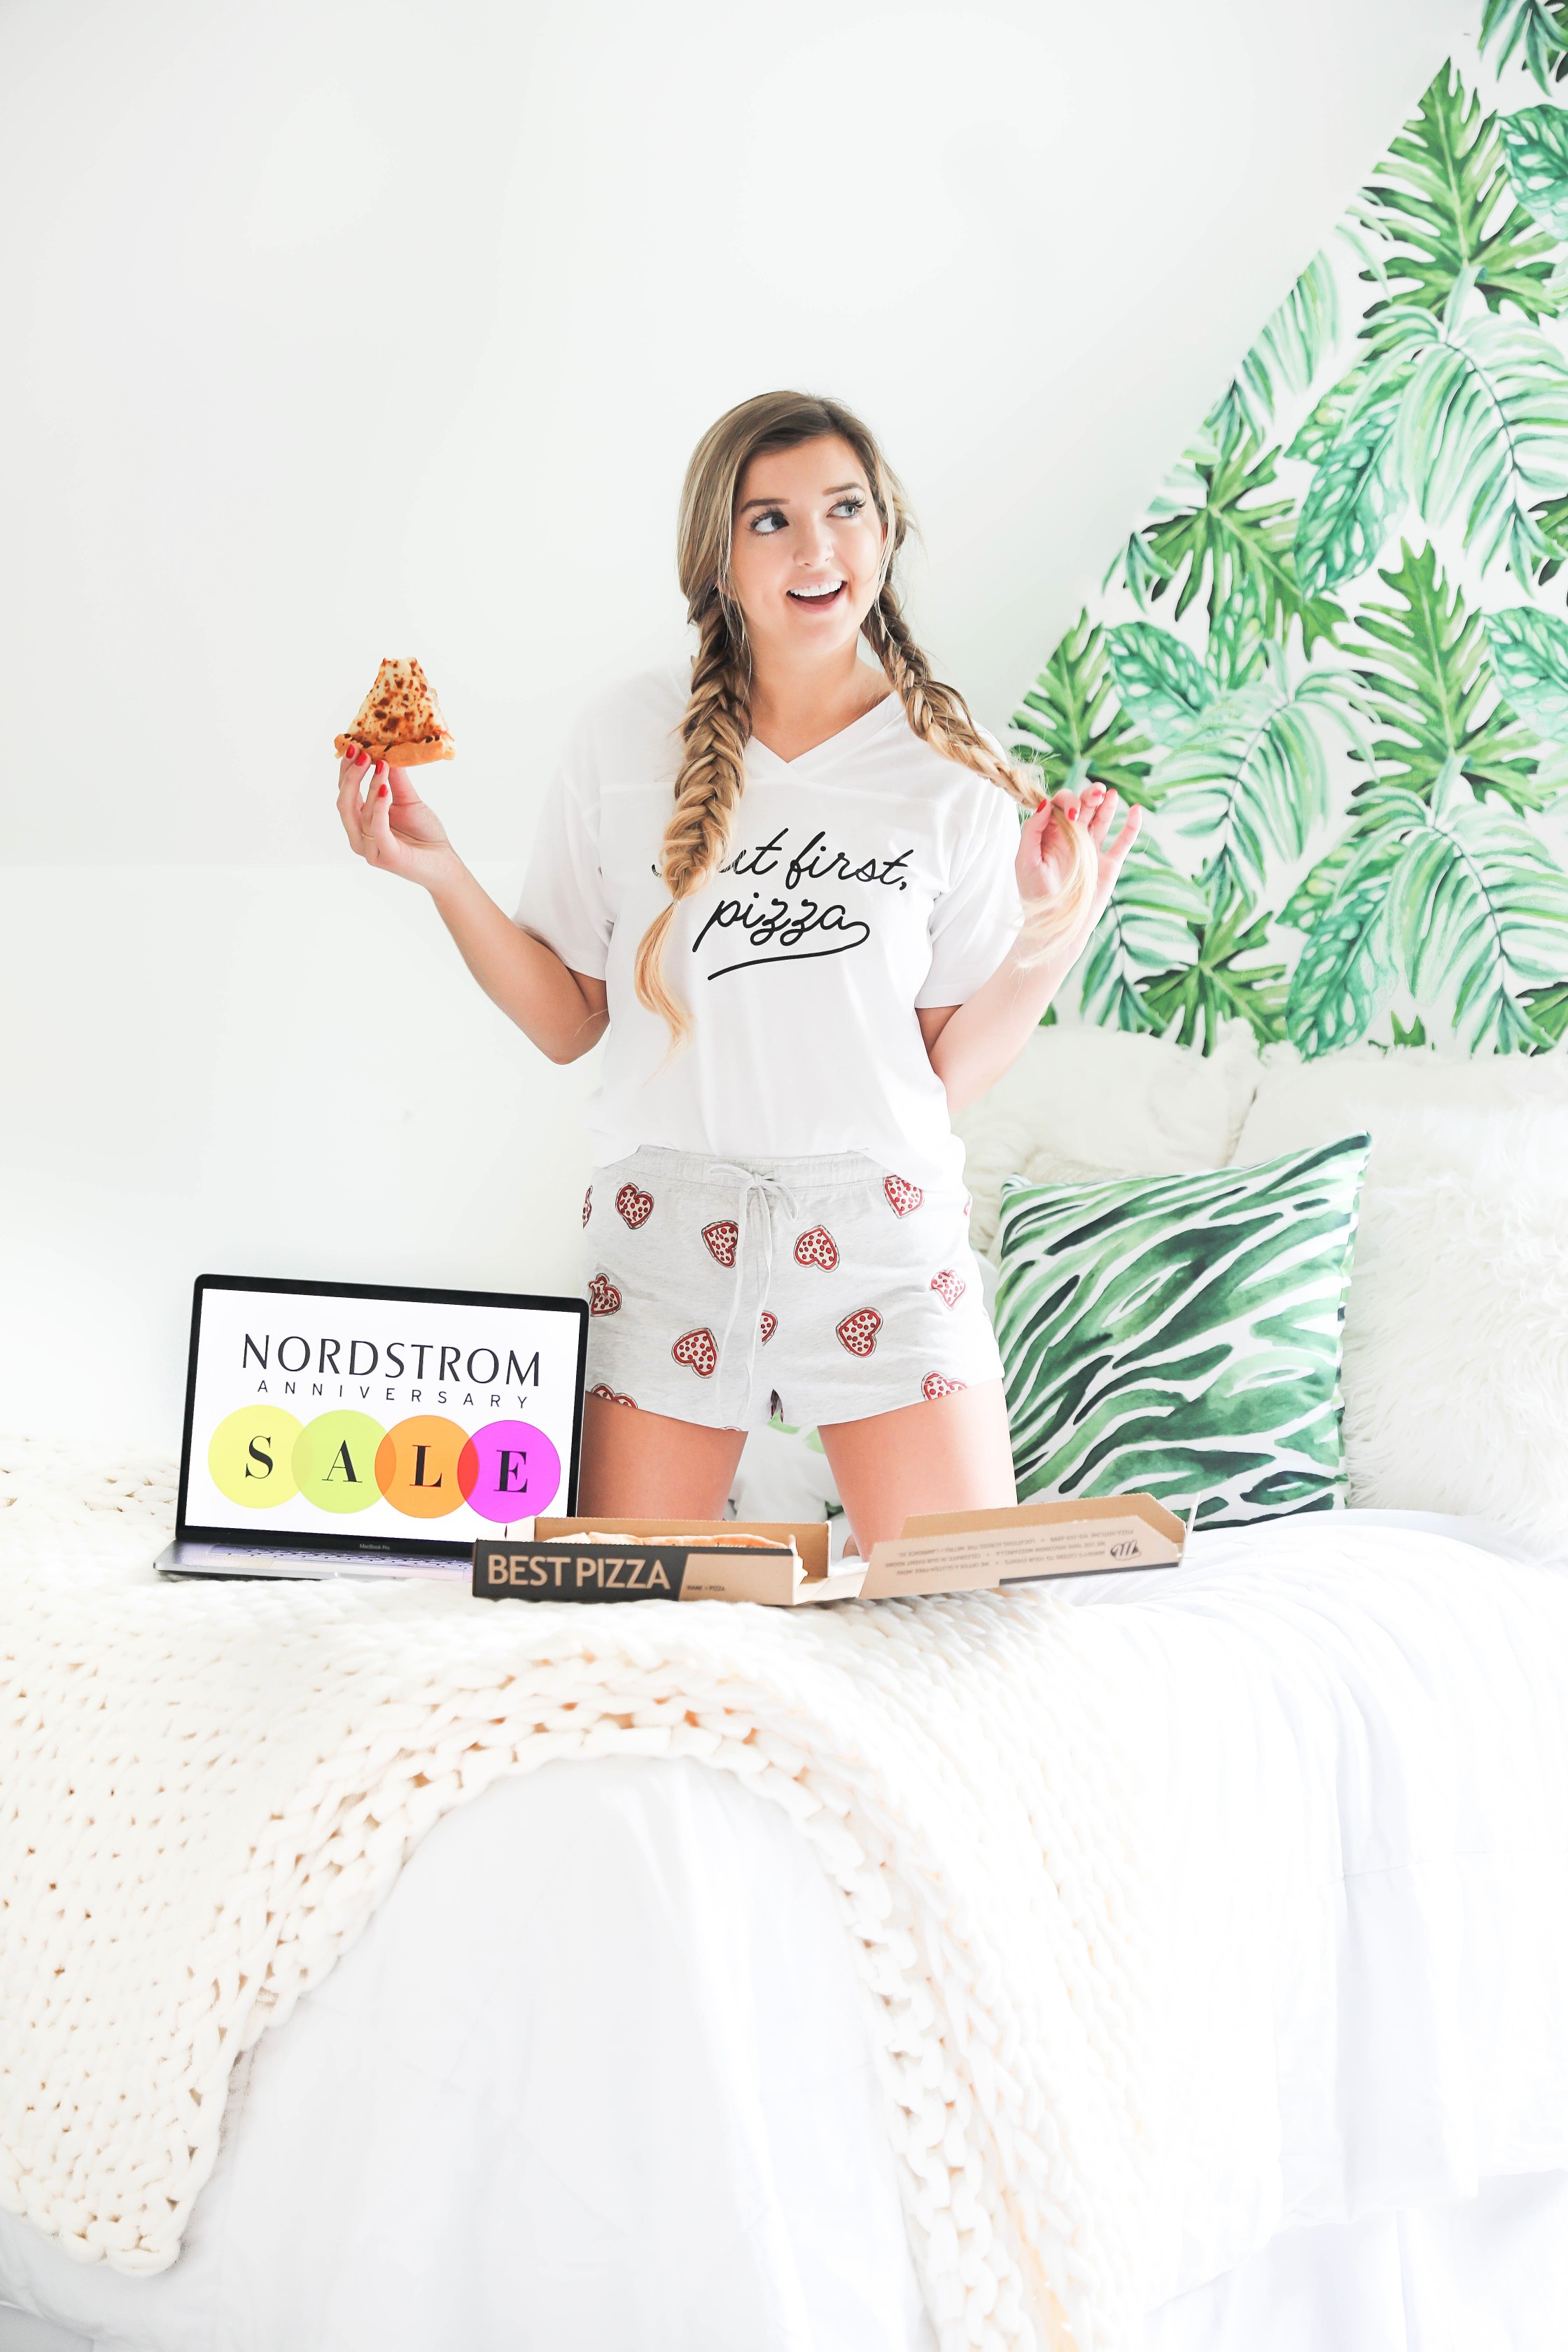 Nordstrom Anniversary Sale 2018! The biggest sale of the year! Everything you need to know about this year's sale! Adorable pizza pajamas! Nothing like a pizza and pj party while shopping! Details on fashion blog daily dose of charm by lauren lindmark